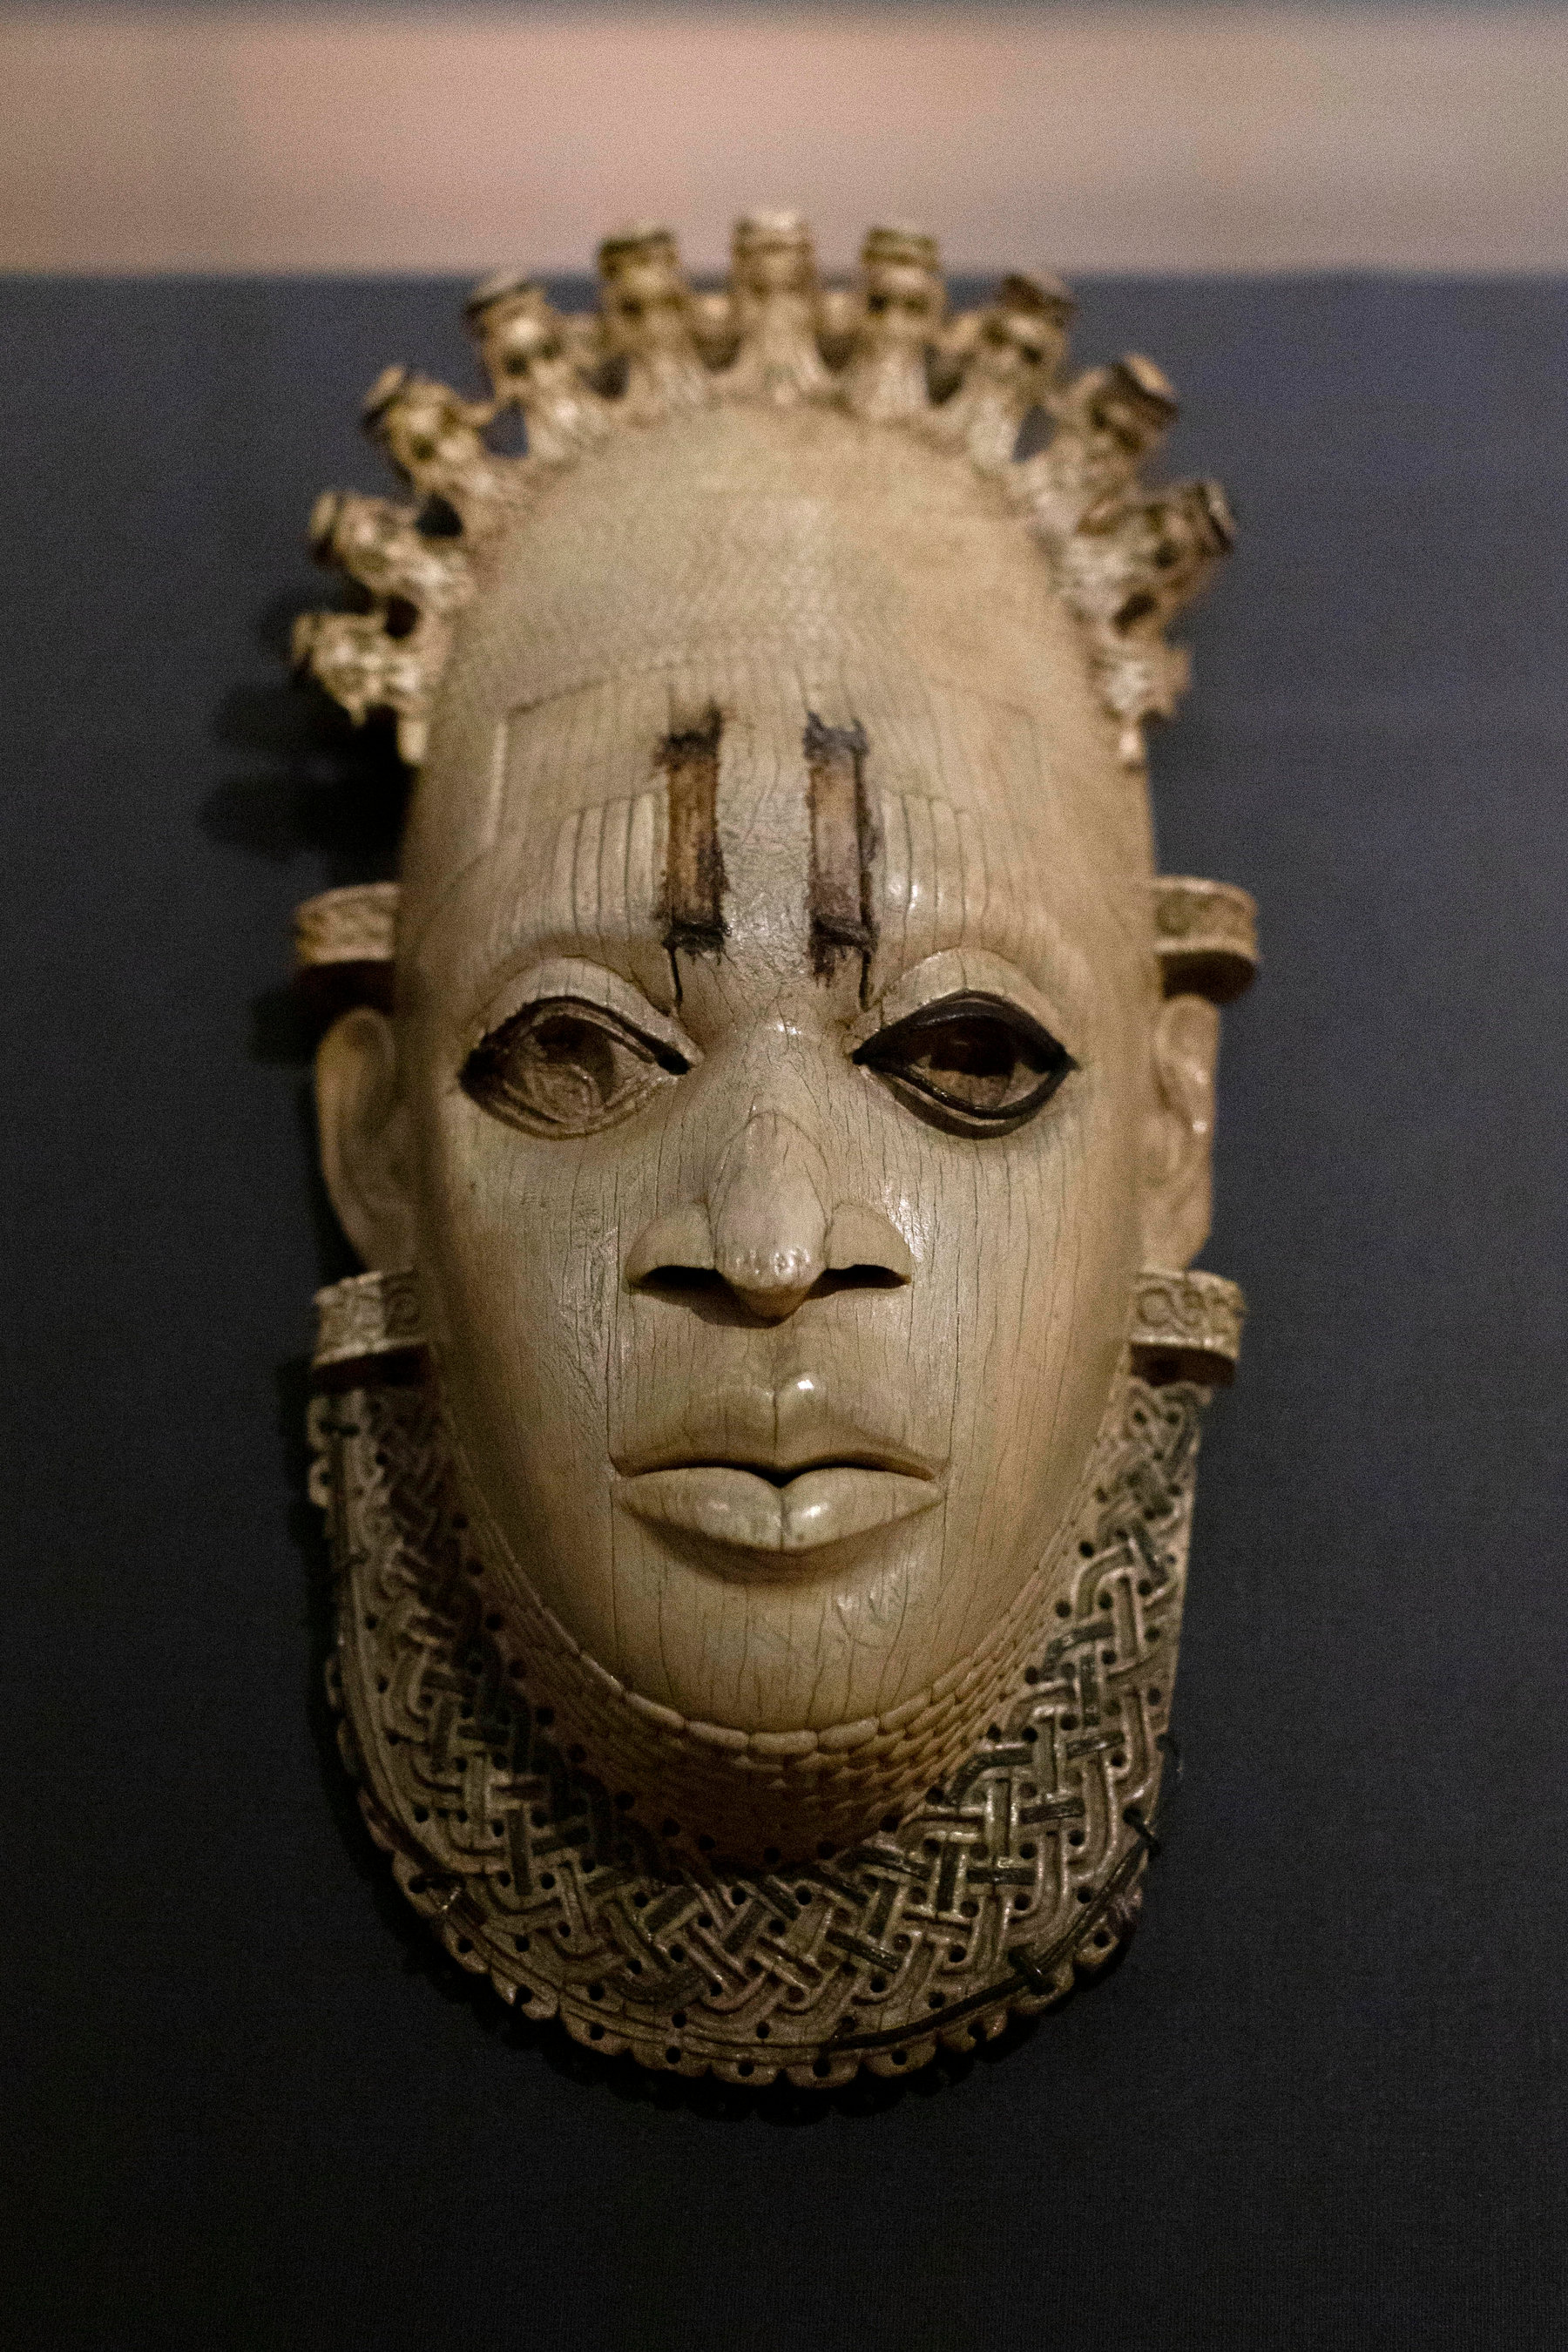 5 amazing facts about the Benin bronze head | Pulse Nigeria